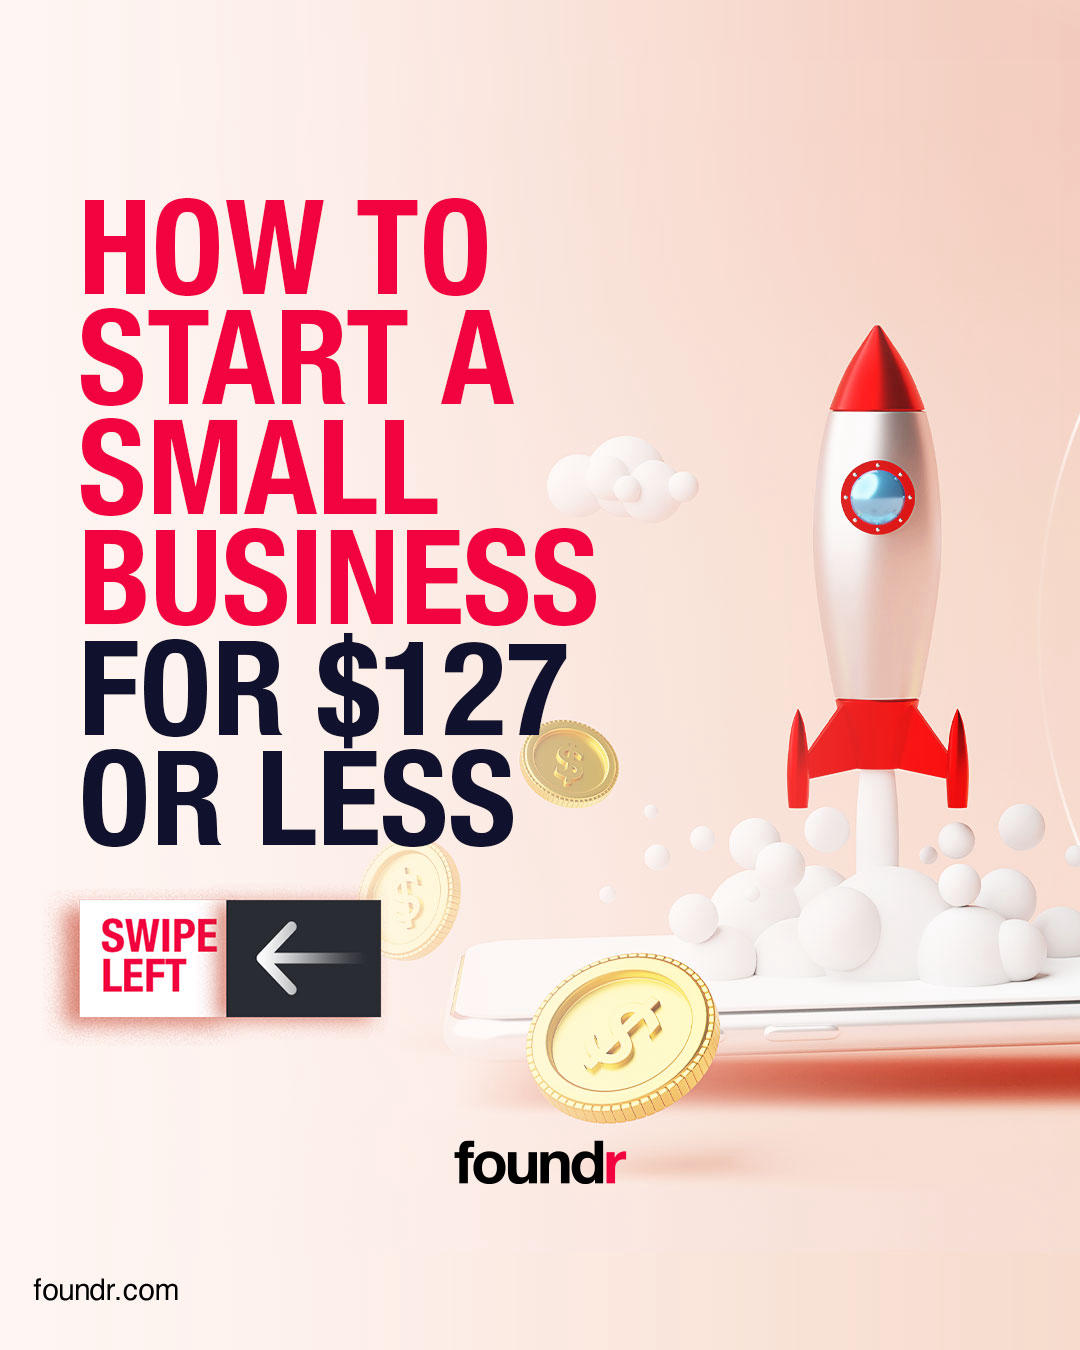 Foundr - How to Start a Small Business for $127 or Less